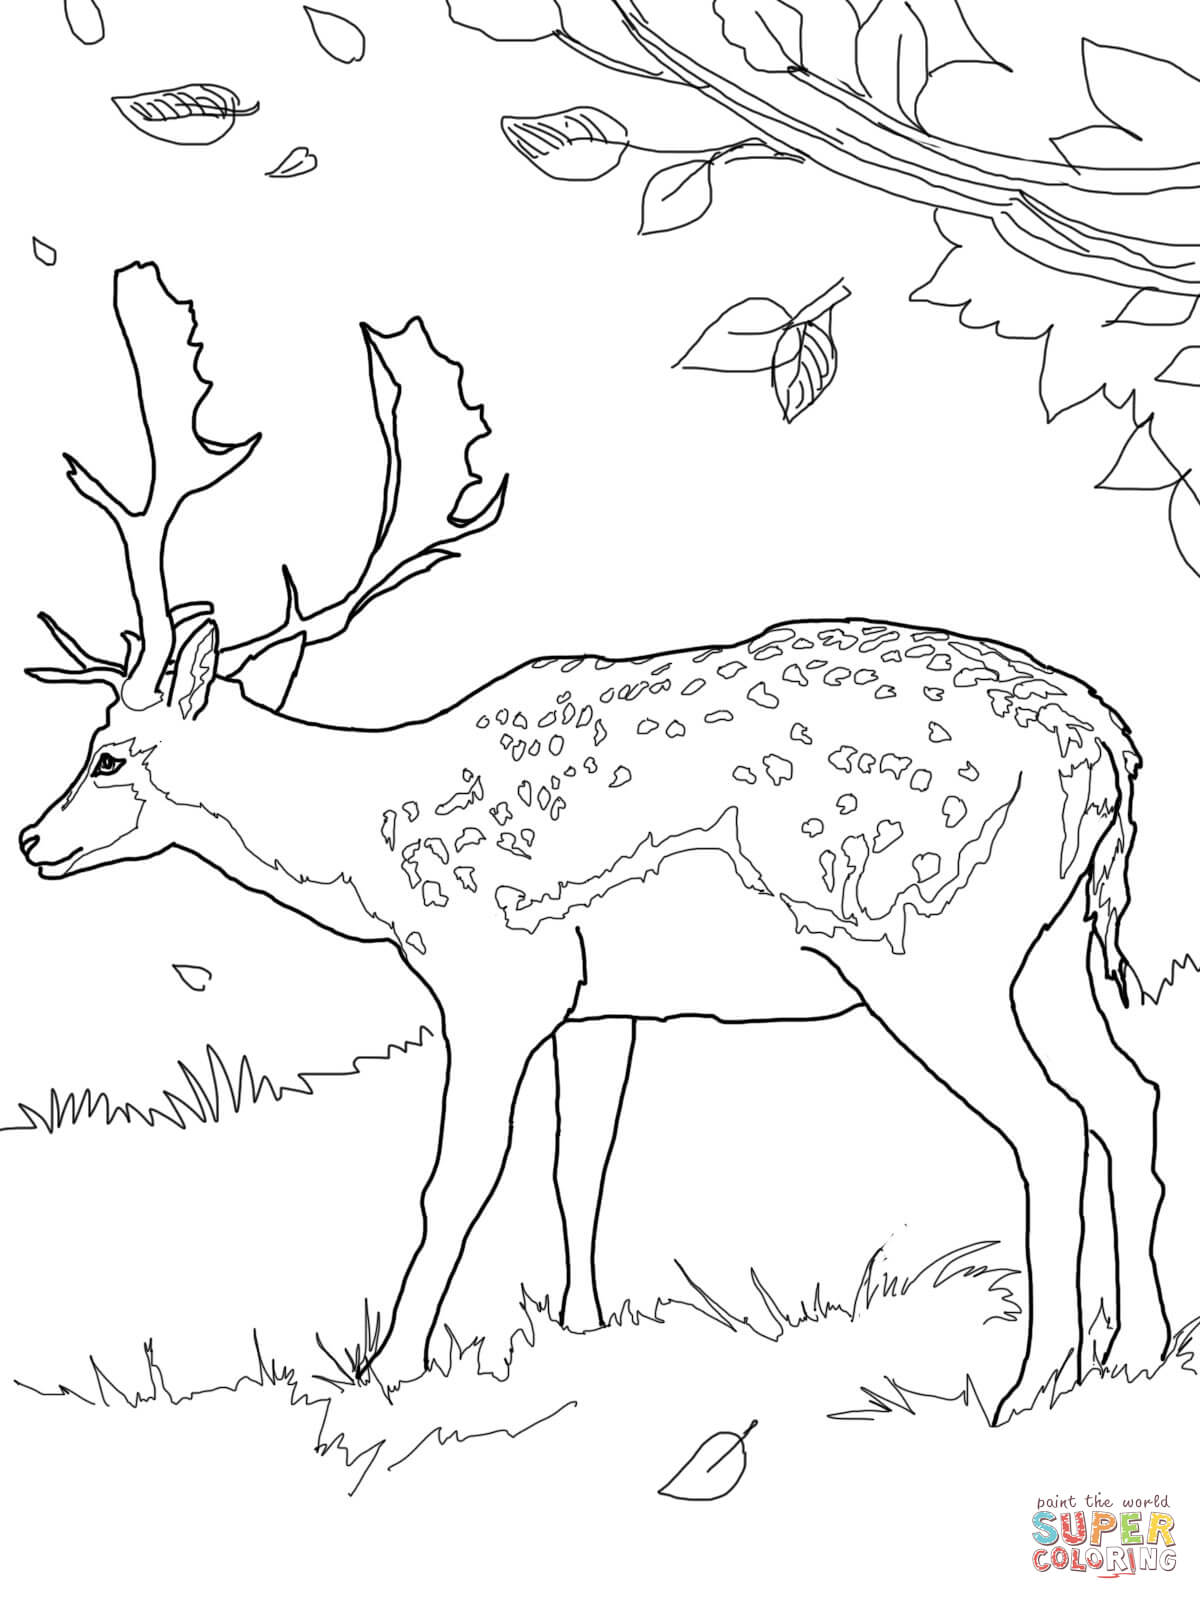 Fallow Deer coloring page | Free Printable Coloring Pages